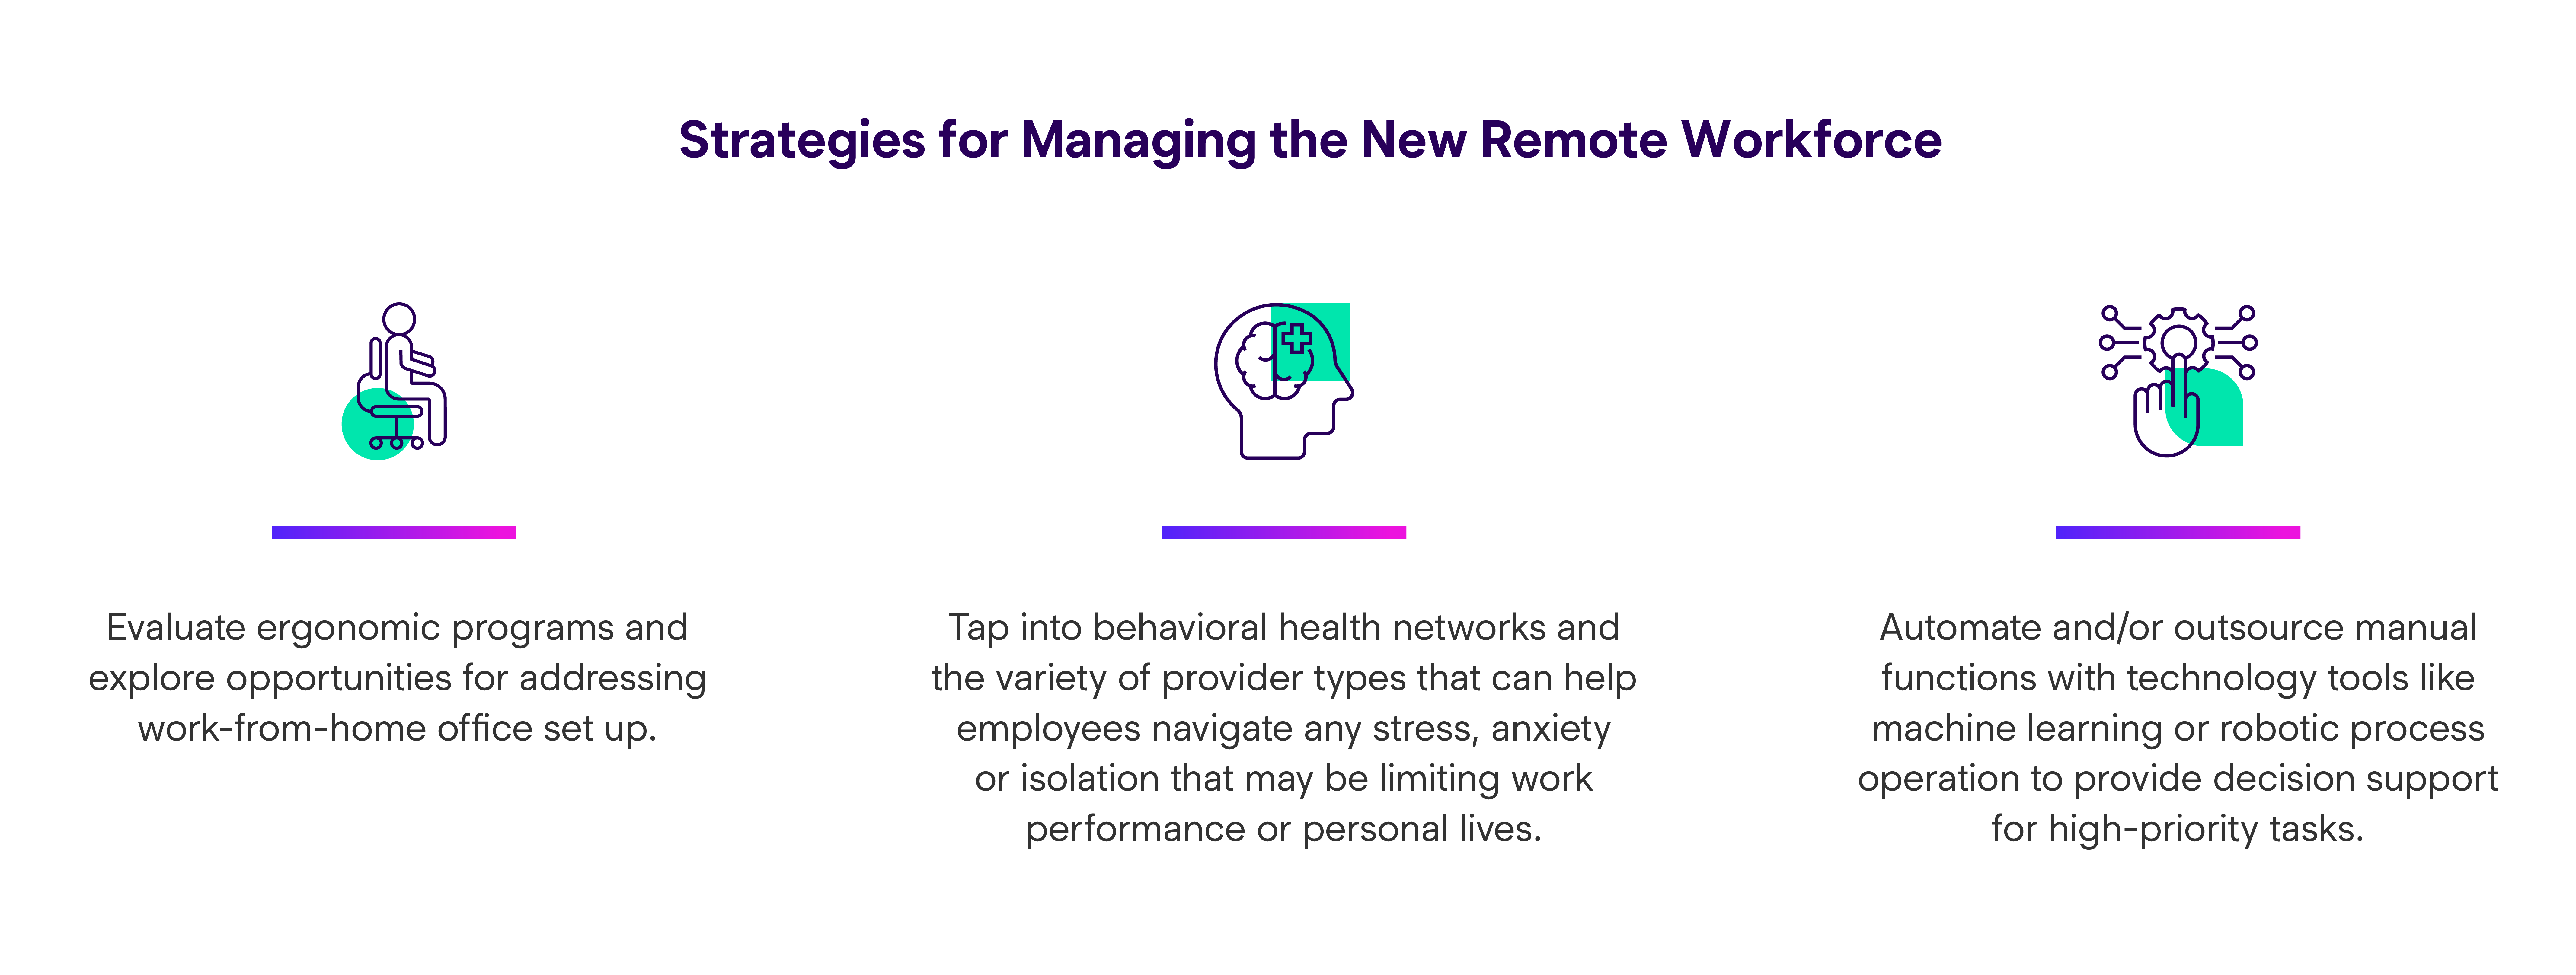 Strategies for Managing the New Remote Workforce